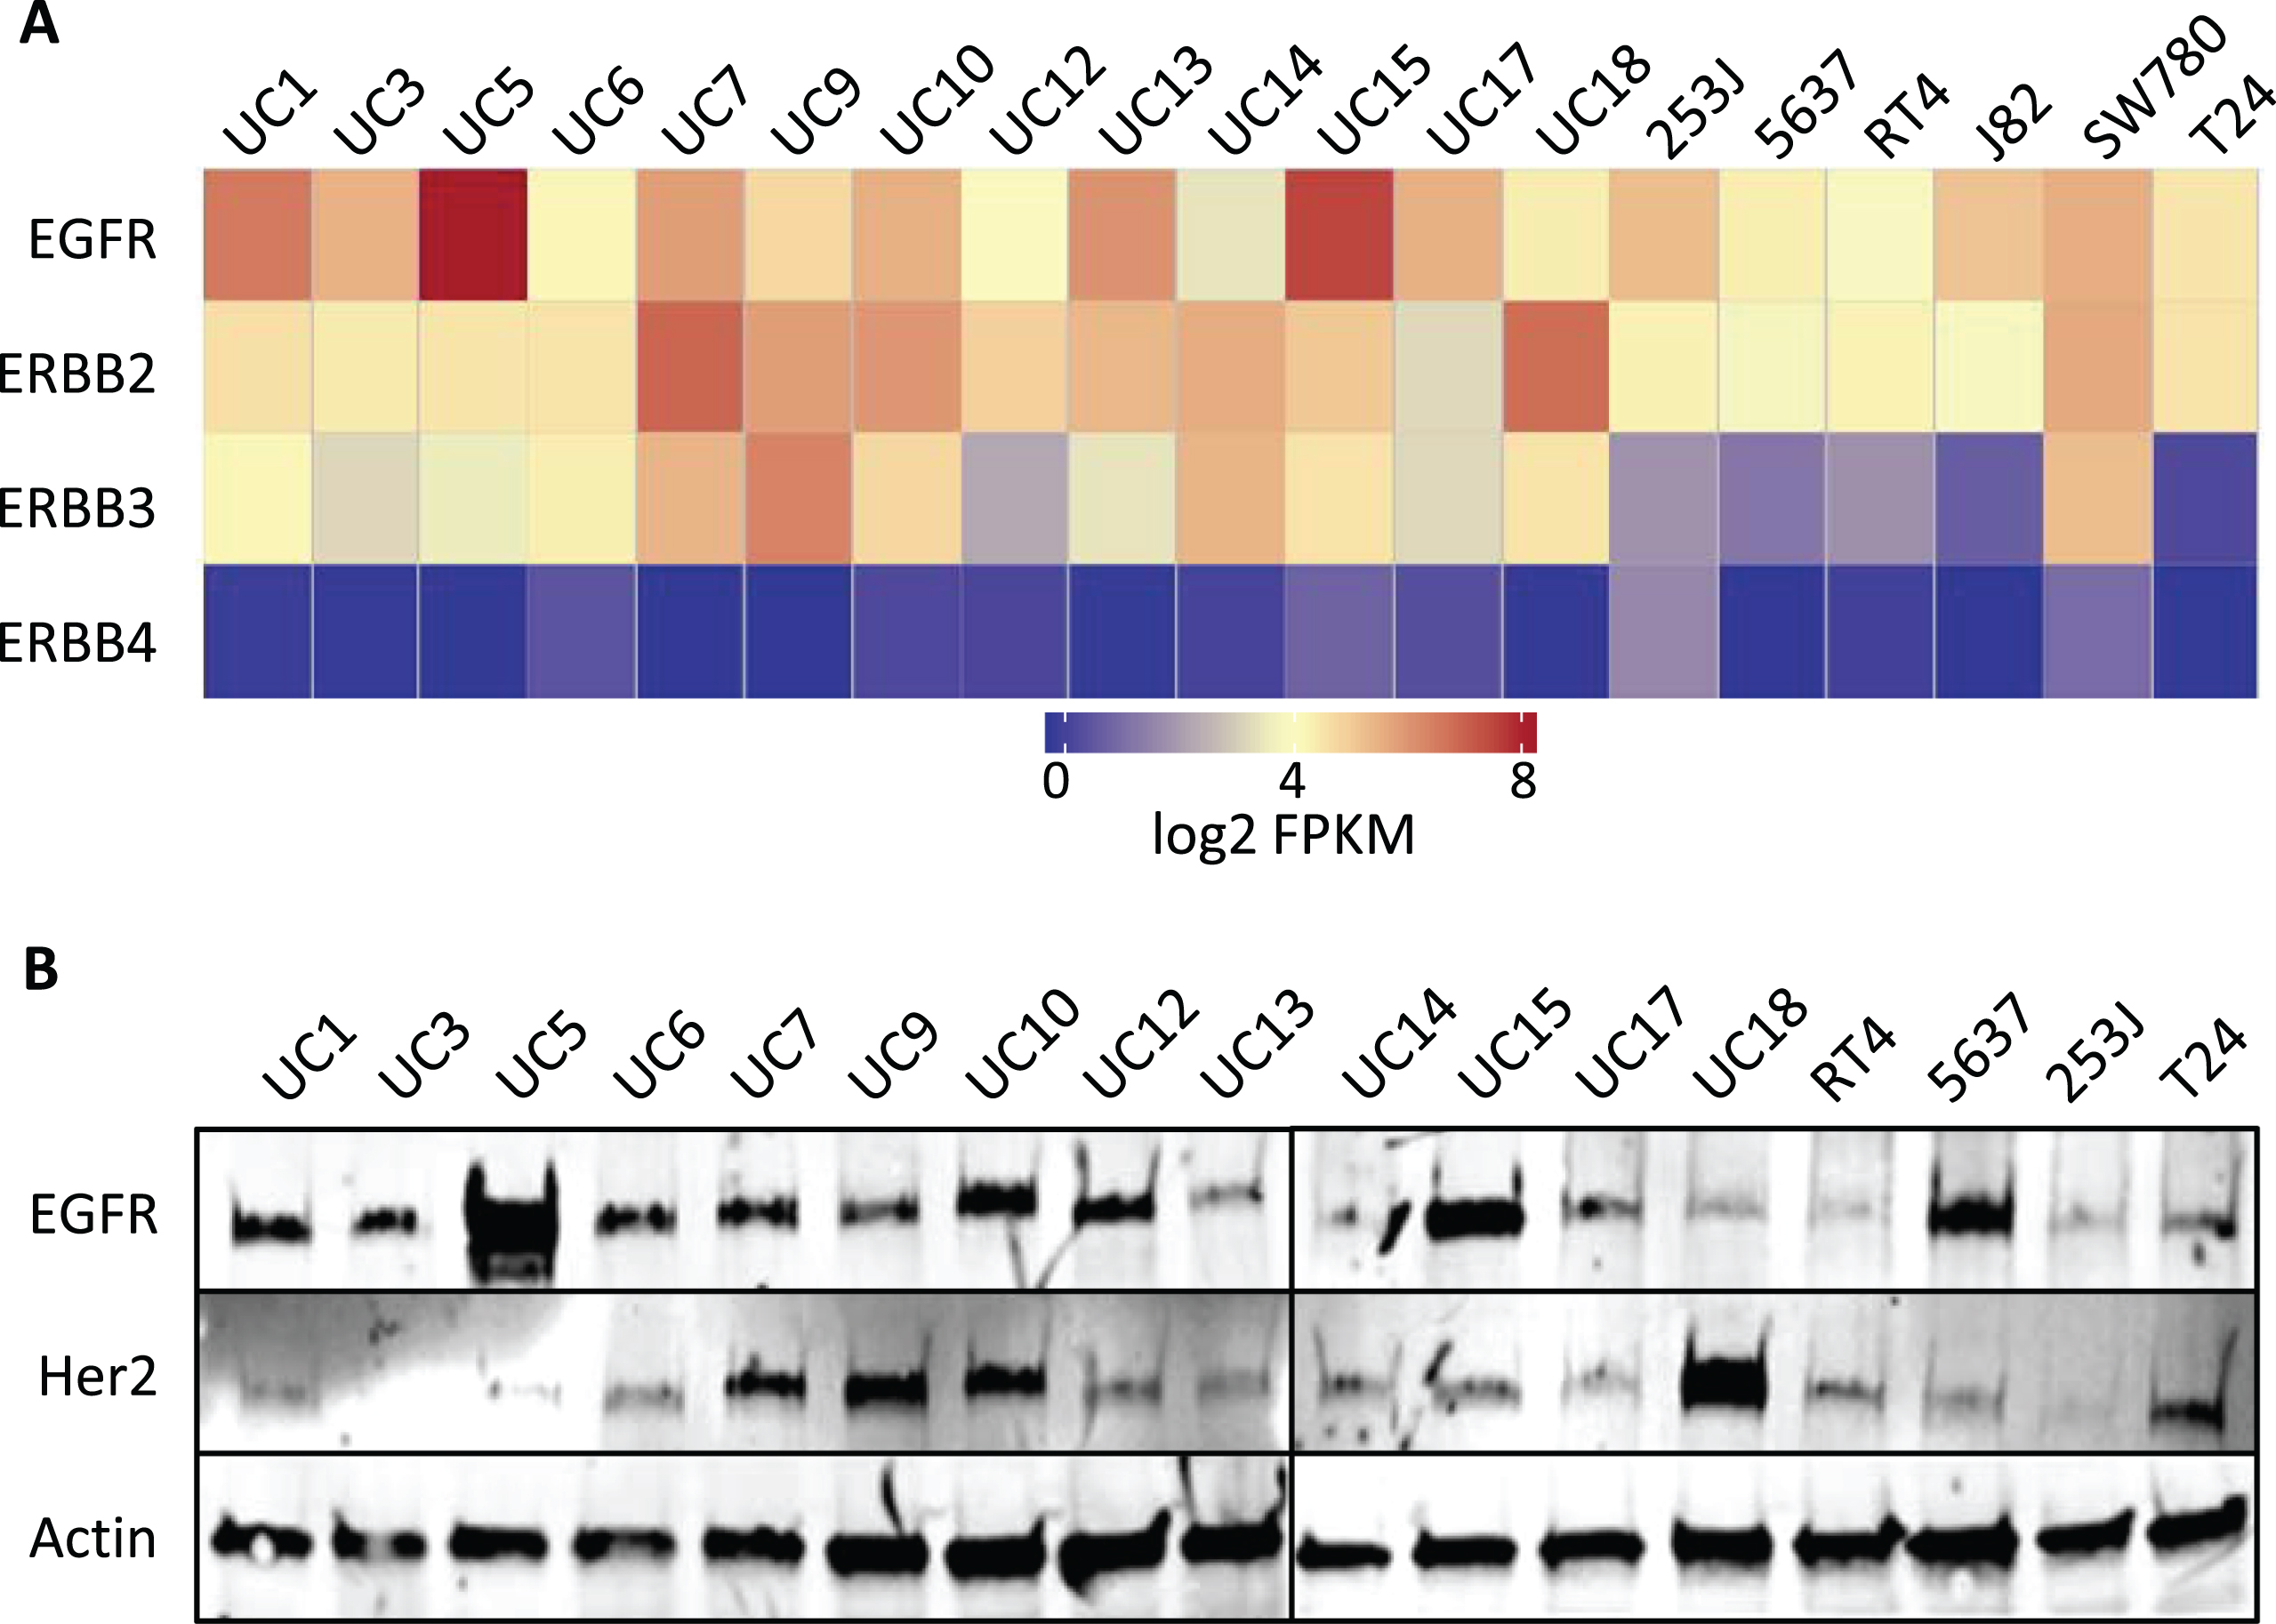 Endogenous RNA and protein expression of ErbB family members. (A) Heat map of the expression of ERBB genes [in log2(FPKM)] in bladder cancer cell lines from RNA-Seq analysis. ErbB family members are listed in the rows (EGFR, ERBB2, ERBB3, ERBB4) and cell lines are listed along the columns. (B) Western blot of whole cell lysates from human bladder cancer cell lines, whose names are listed above each lane, which were probed with EGFR and HER2 antibodies. Actin was used as a loading control.